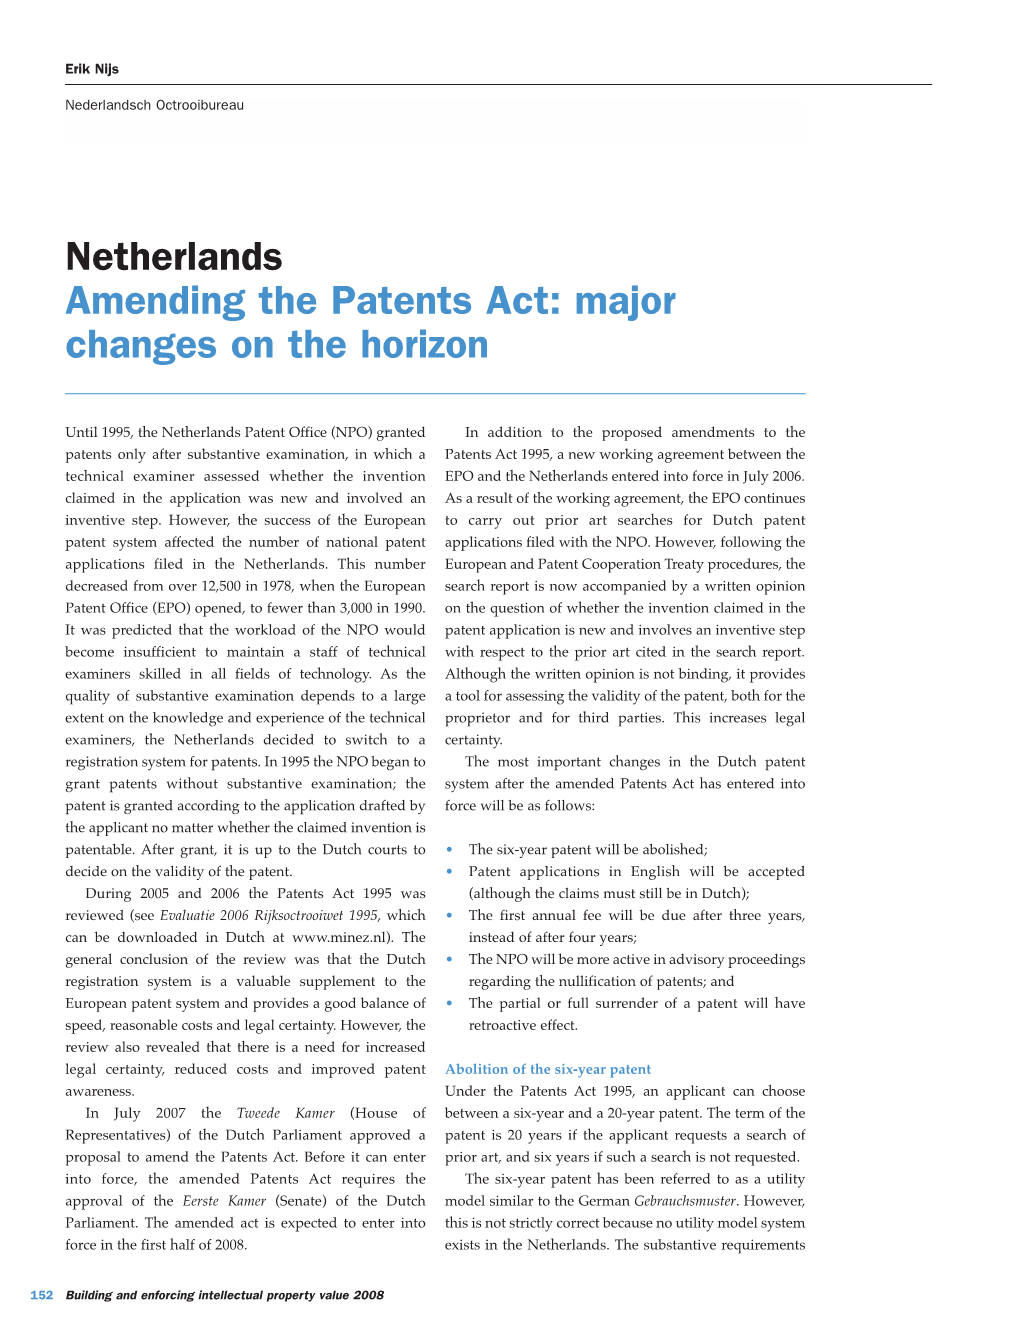 Netherlands Amending the Patents Act: Major Changes on the Horizon